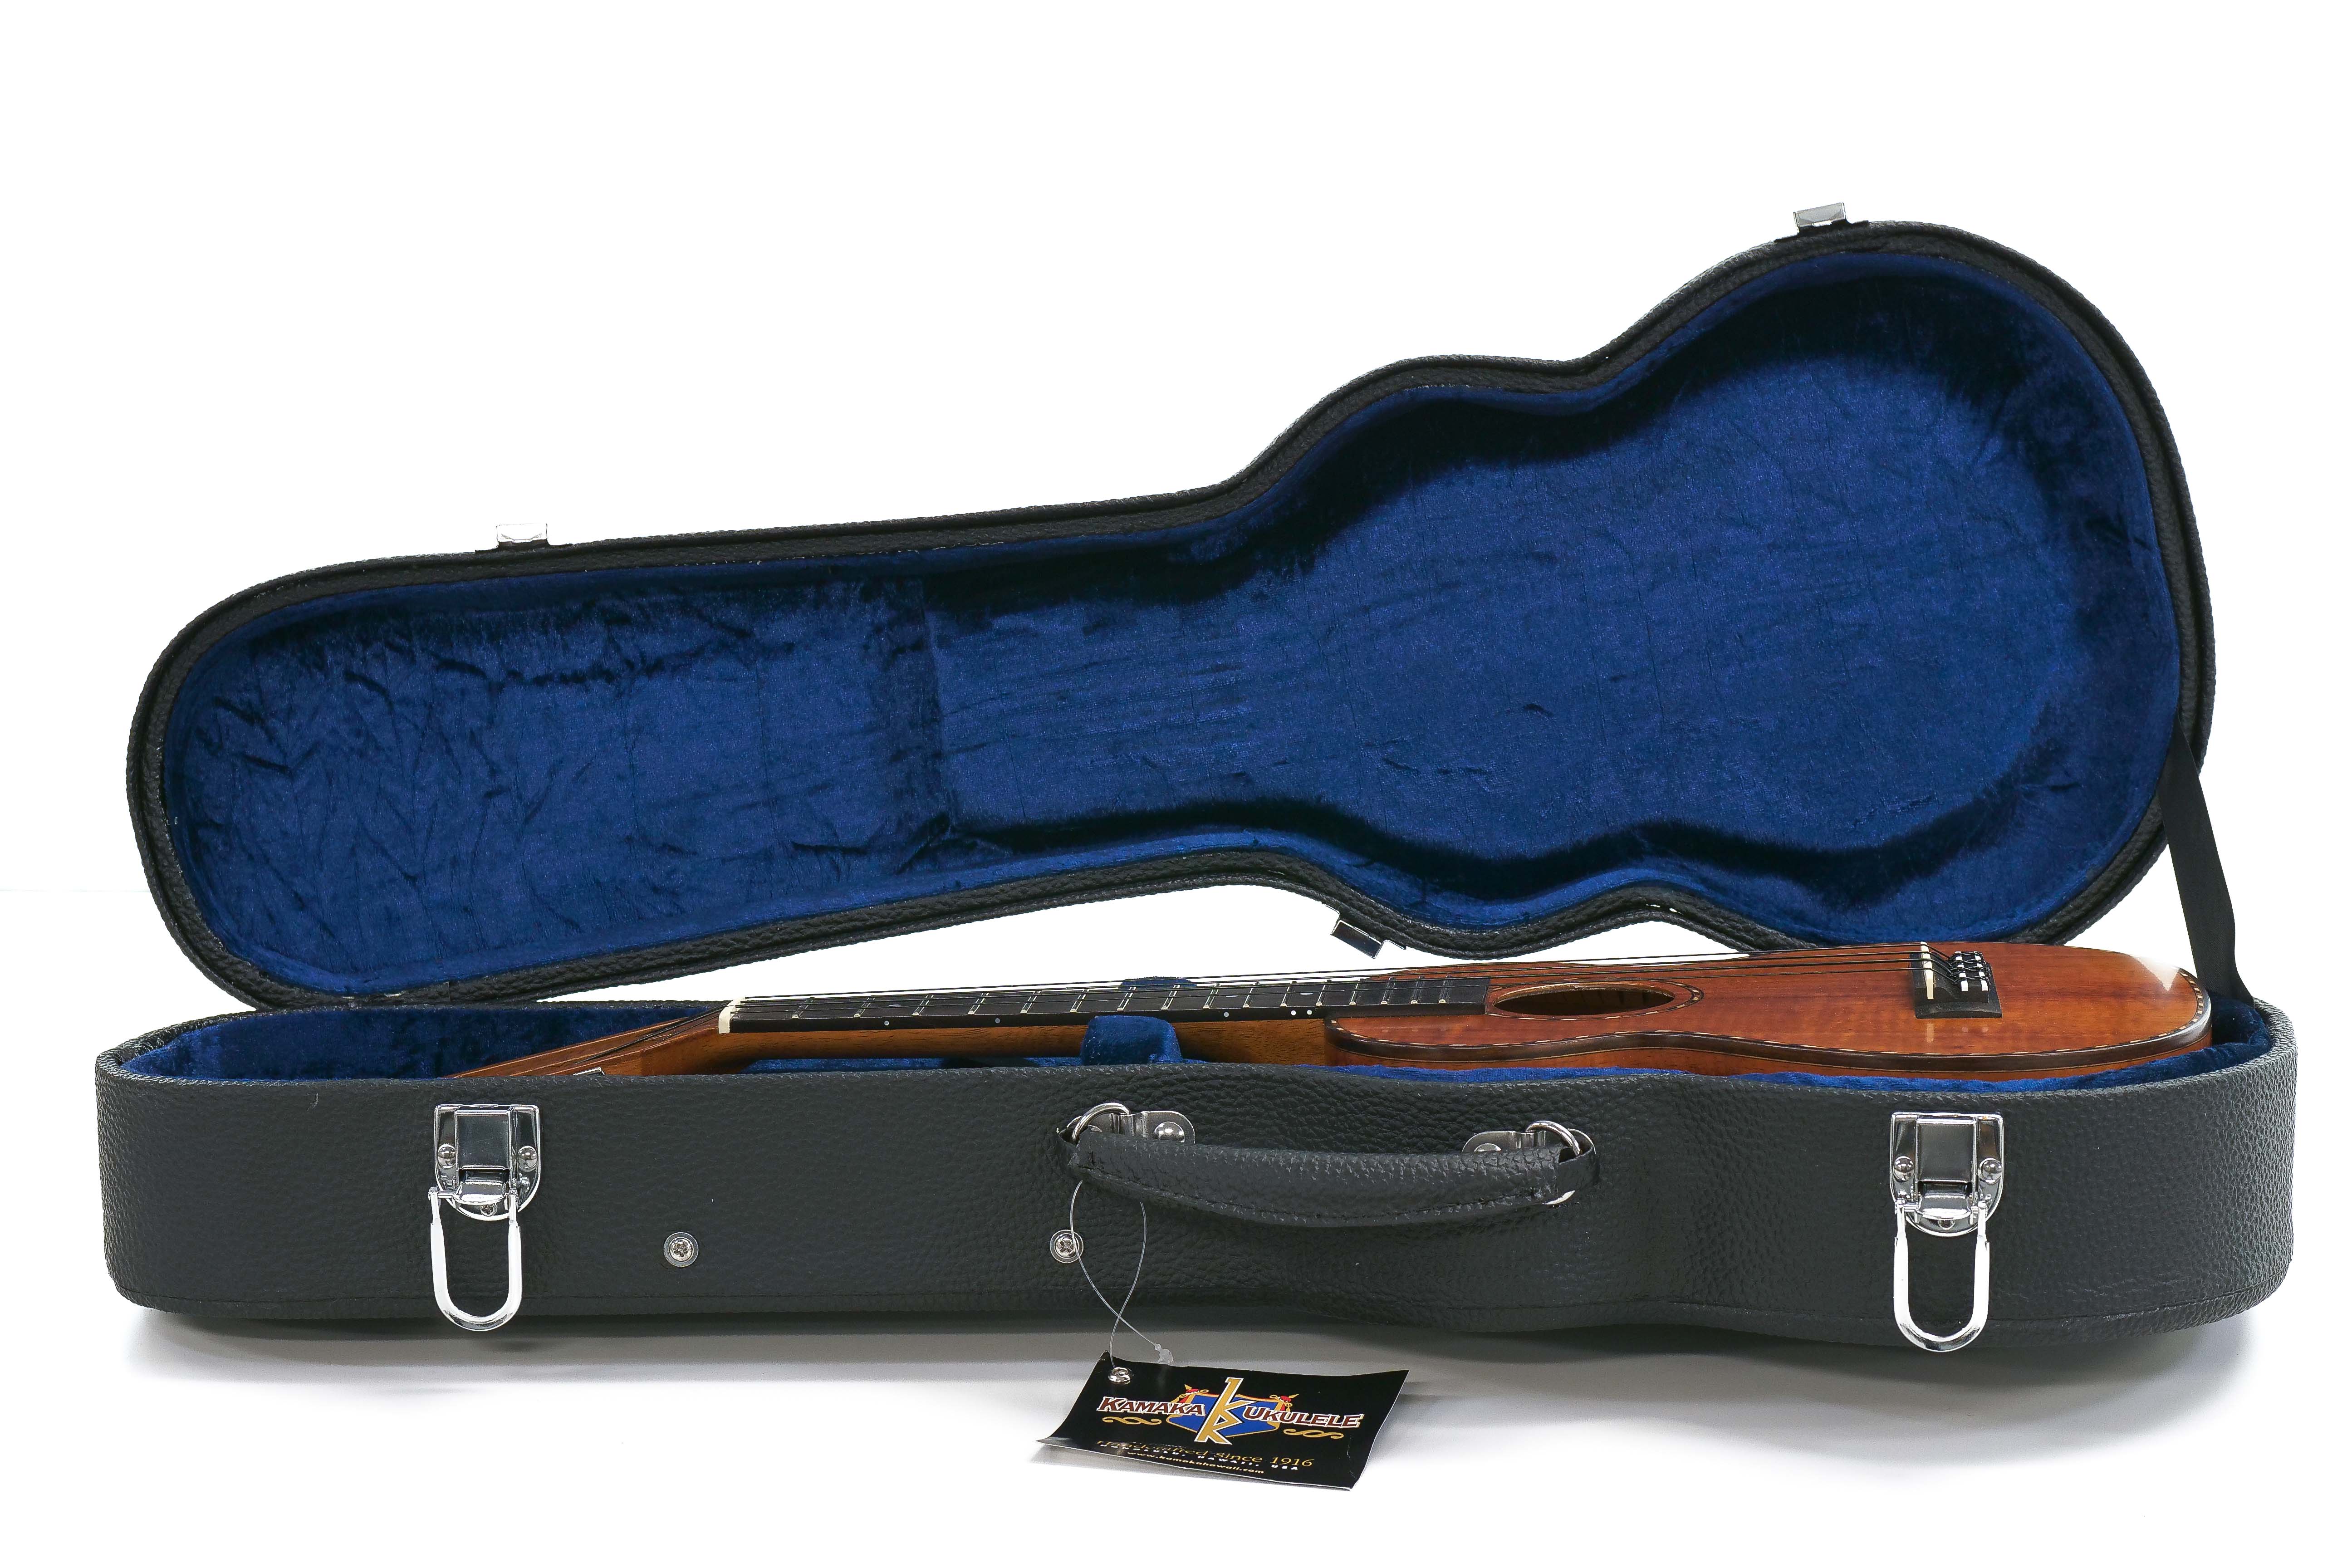 Kamaka HF-DI Ukulele Concert Deluxe Slotted Head with Case (101) - Willcutt  Guitars